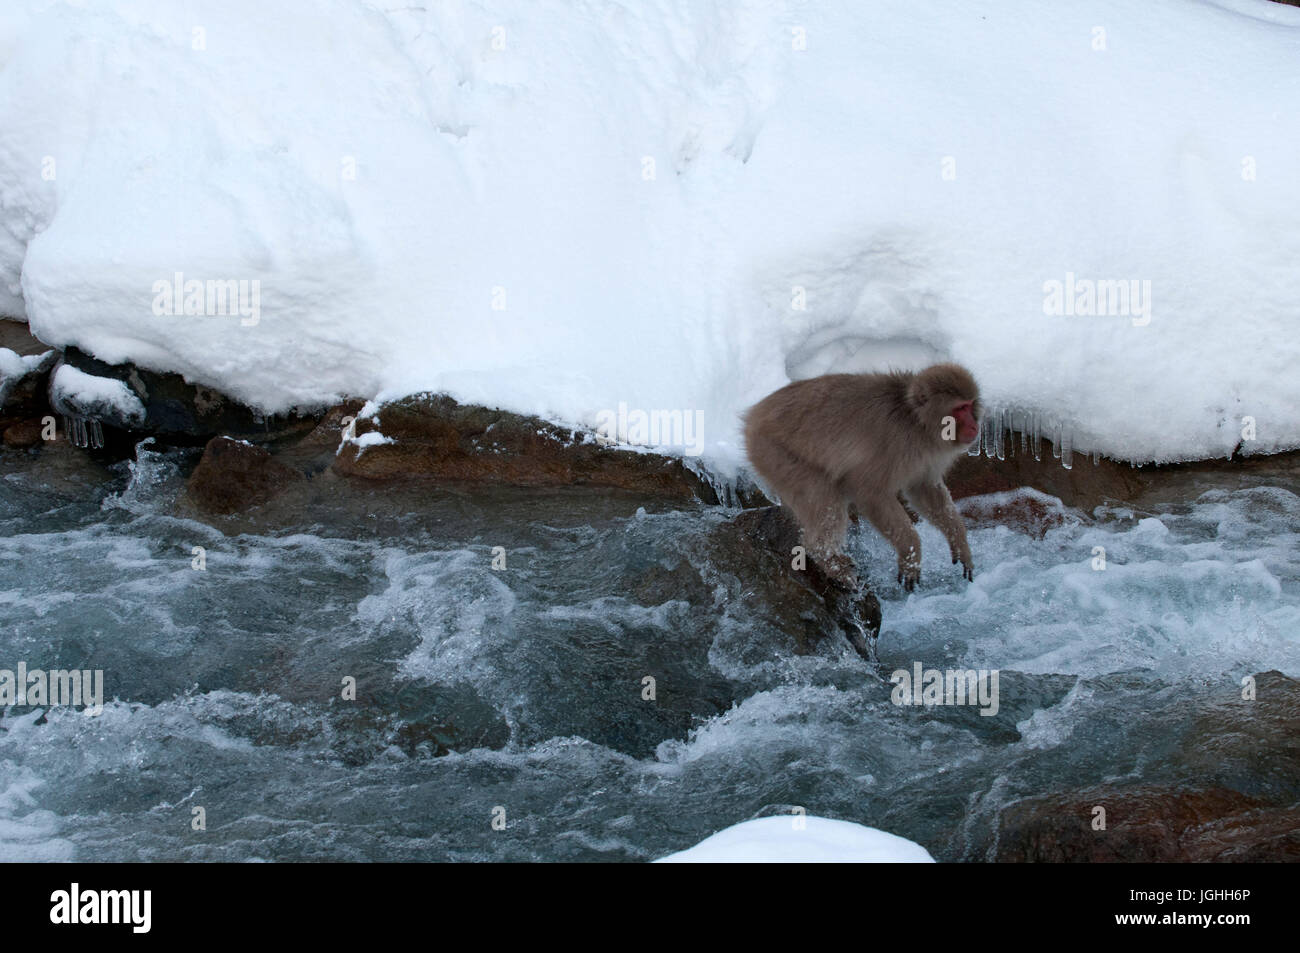 Japanese macaque or snow japanese monkey jumping the river (Macaca fuscata), Japan Monkey-Japanese, Macaca fuscata (Macaque Japon) Japan, 2017 Stock Photo